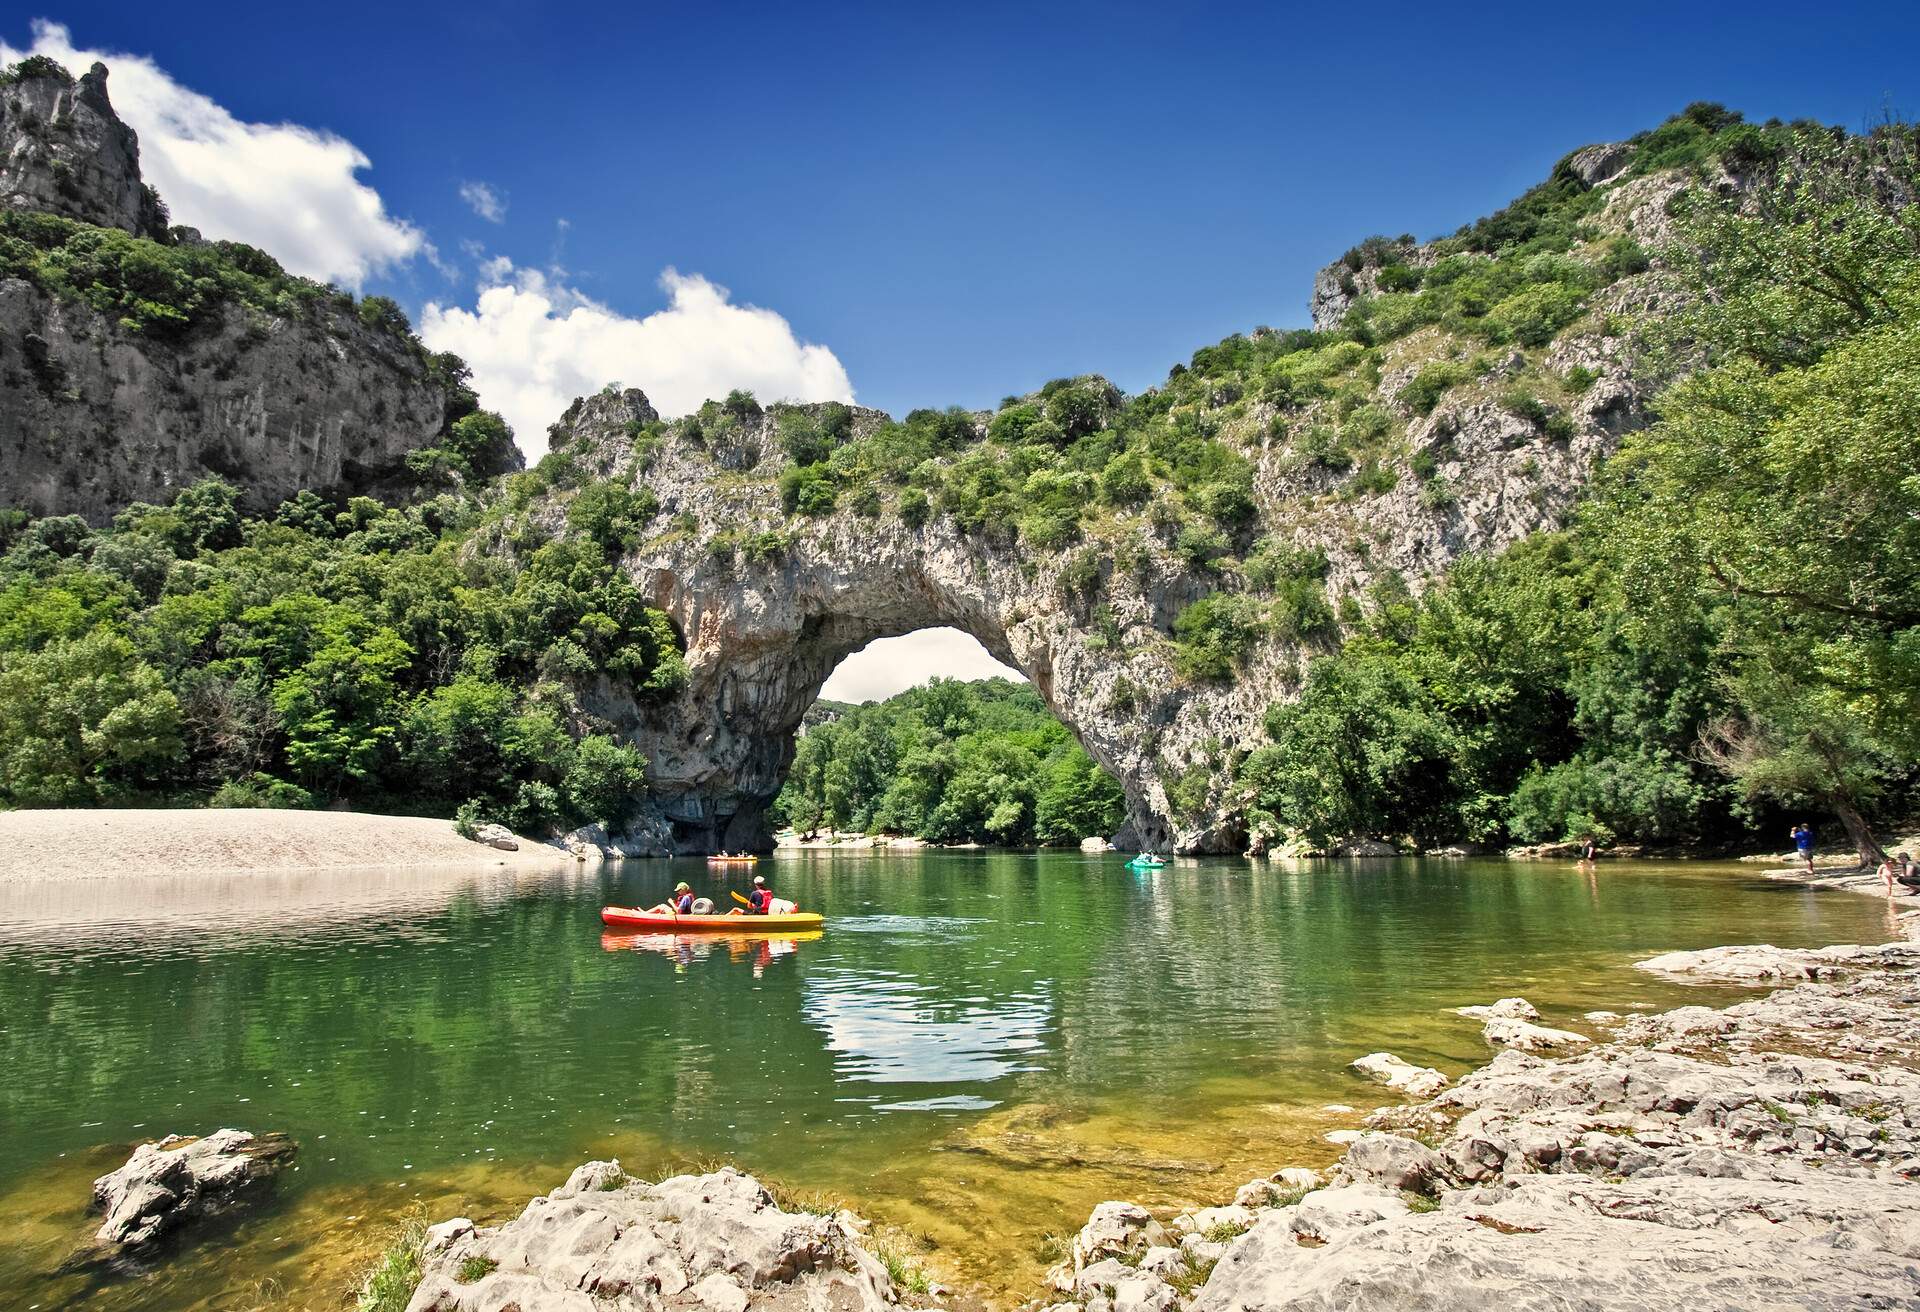 The Pont d'Arc is a natural bridge in the south of France and was carved out by the river Ardeche. It is a very popular canoeing and kayaking area.